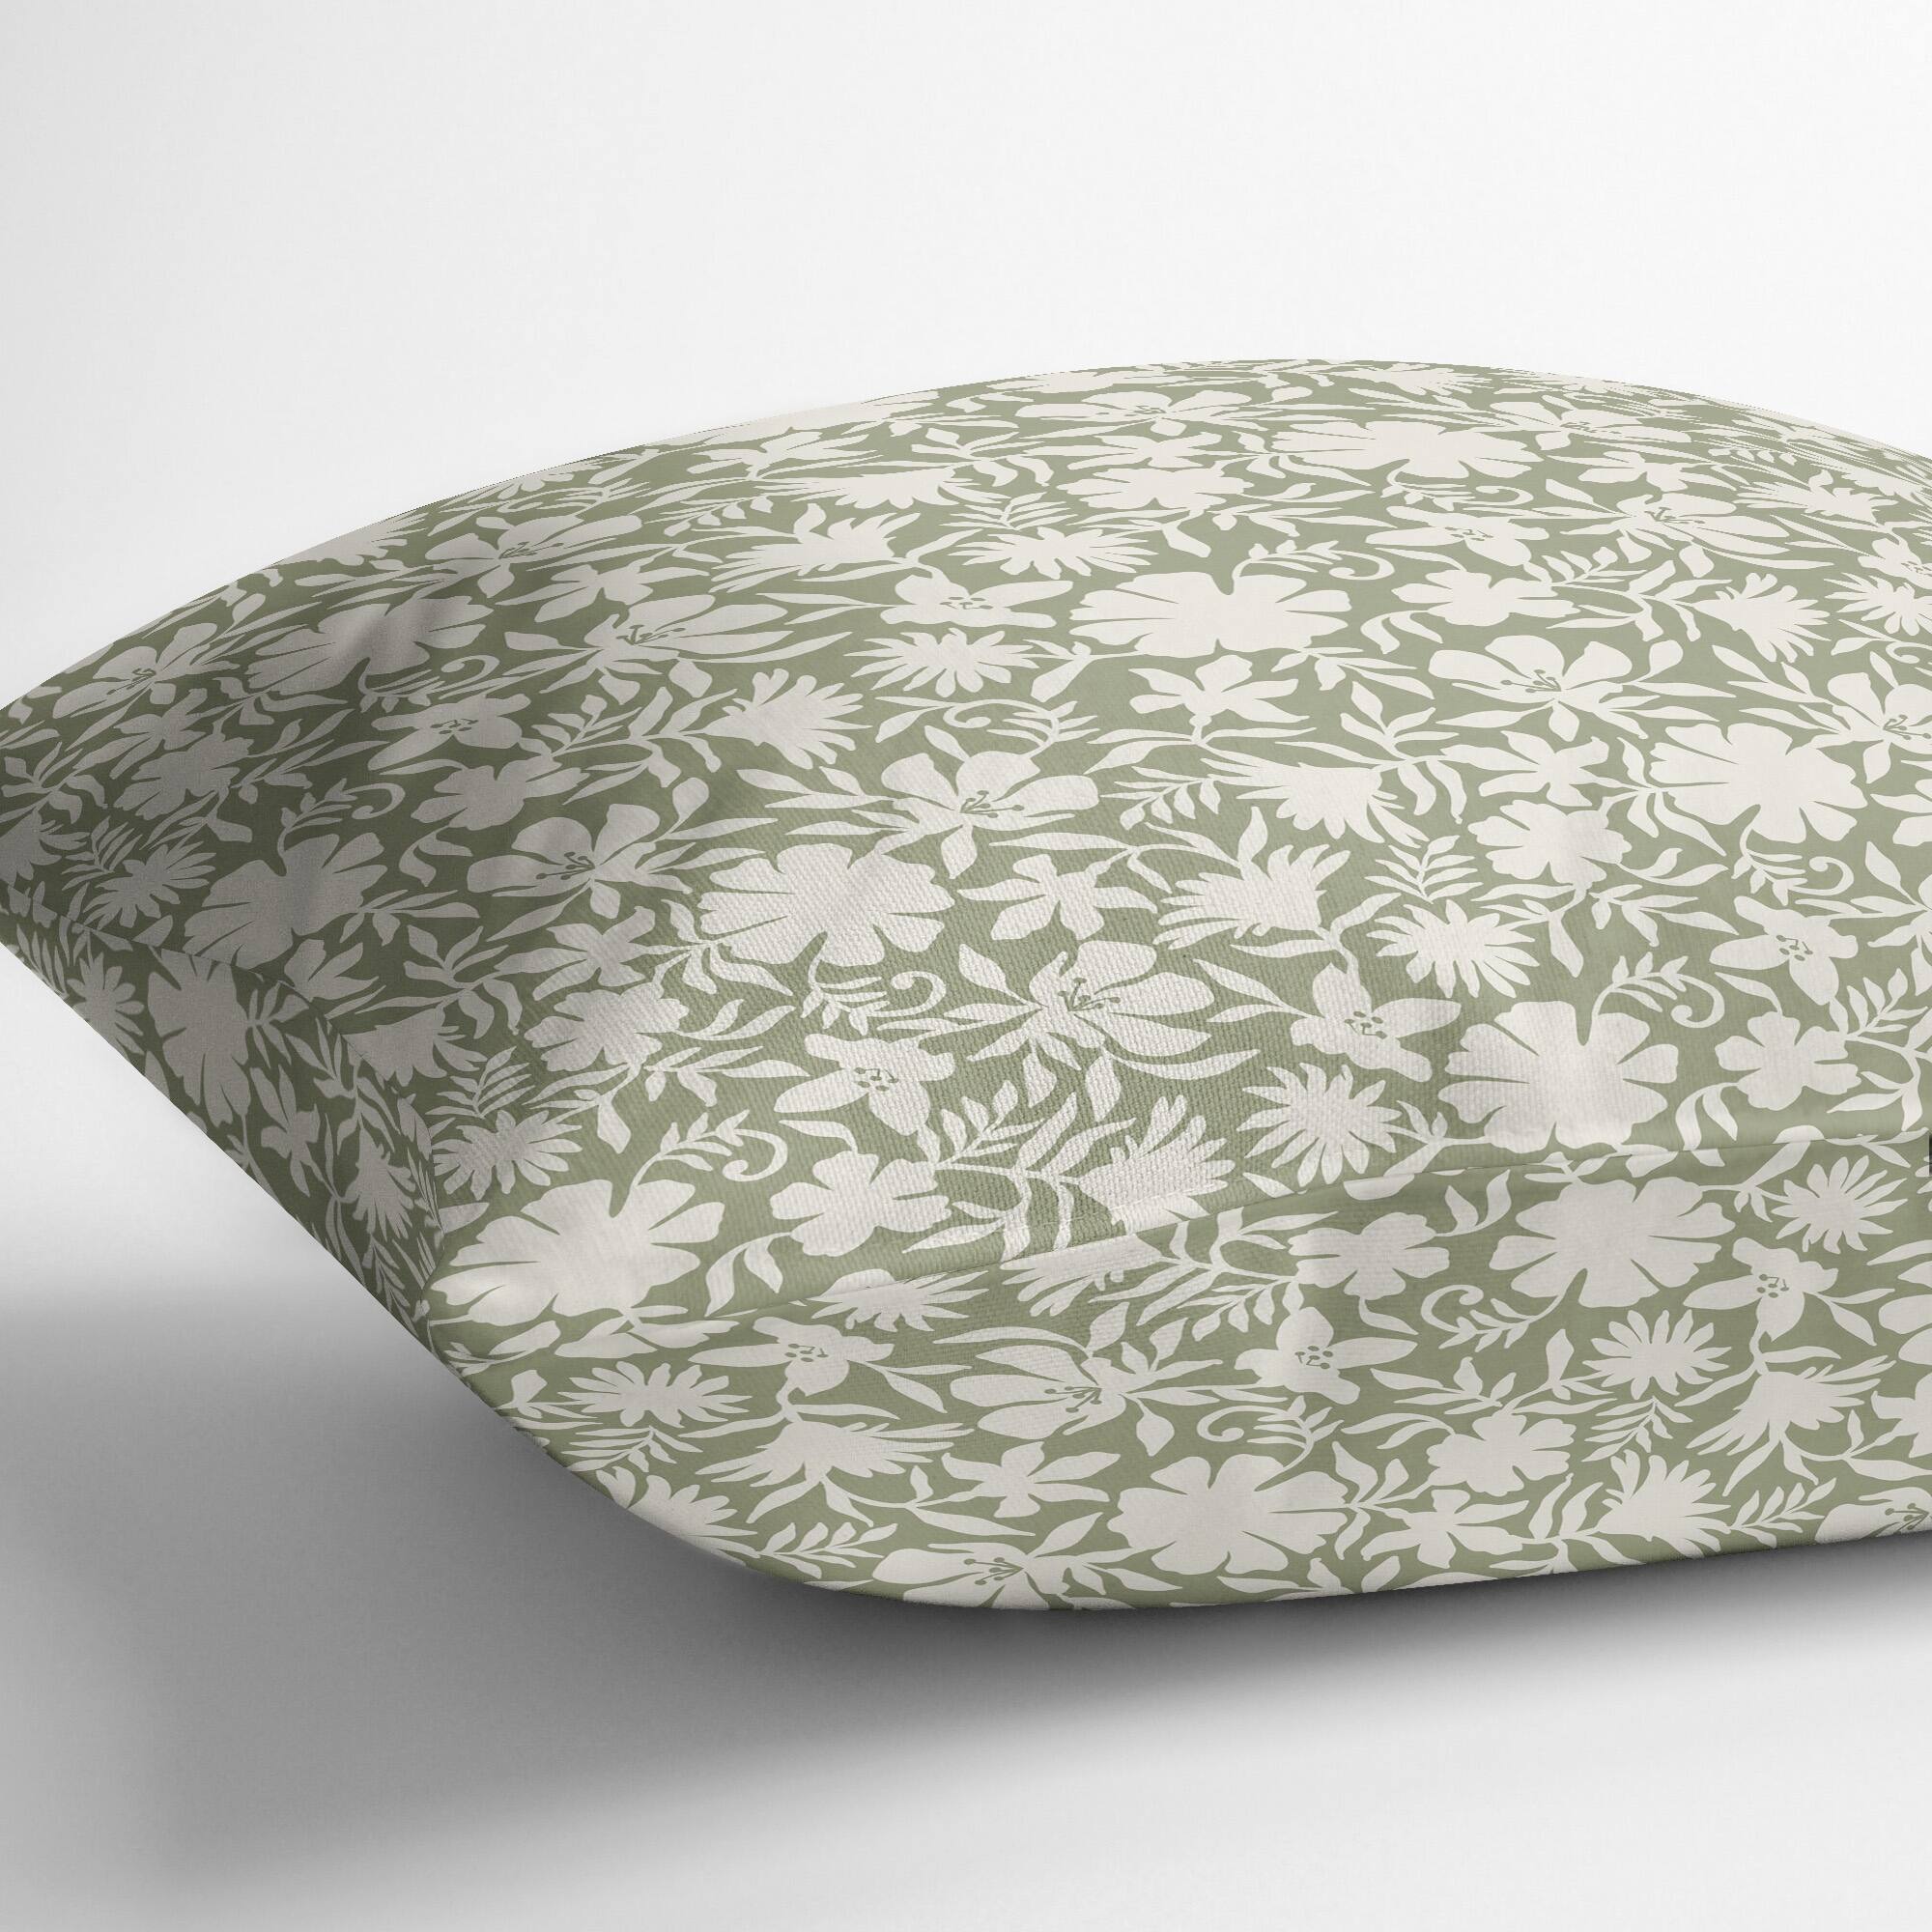 MINI FLORAL SAGE Outdoor Pillow By Kavka Designs - Bed Bath & Beyond ...